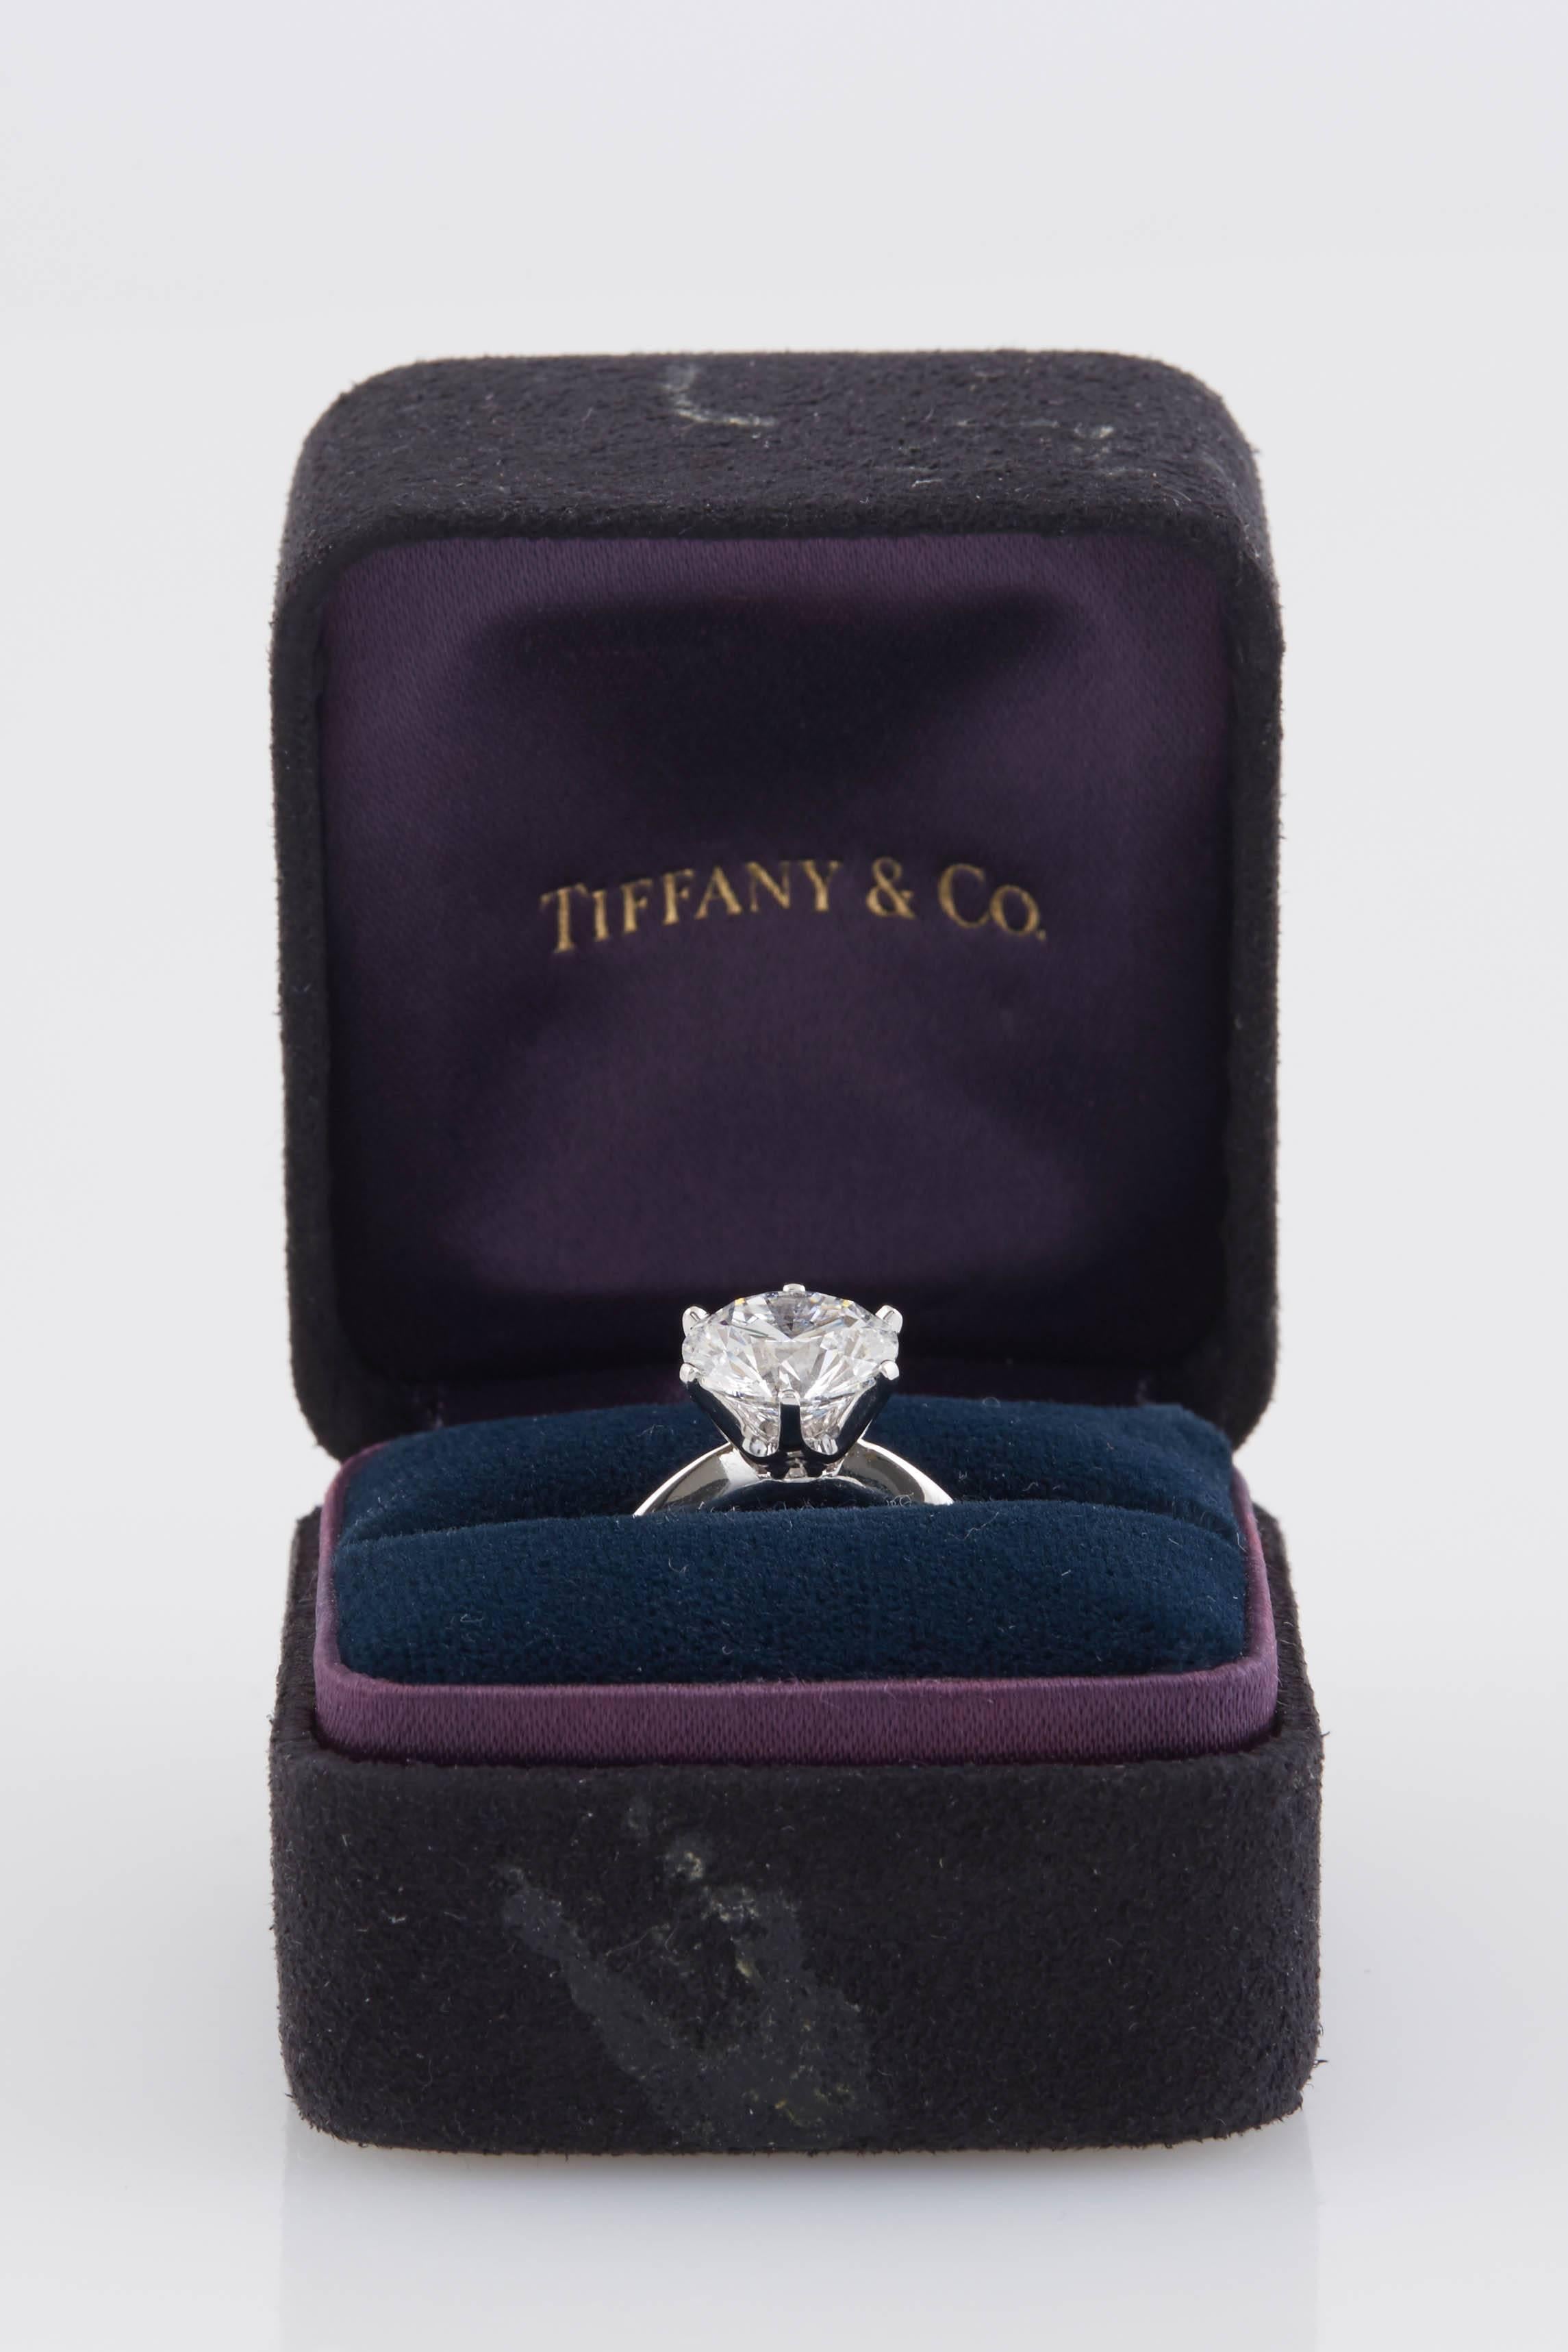 Solitaire engagement ring, finely crafted in platinum in traditional 6 prongs Tiffany and Co setting,   with Round Brilliant cut diamond, weighing 3.04 carat and GIA certified, E Color VVS2 Clarity. Supported by documents from Tiffany & Co.